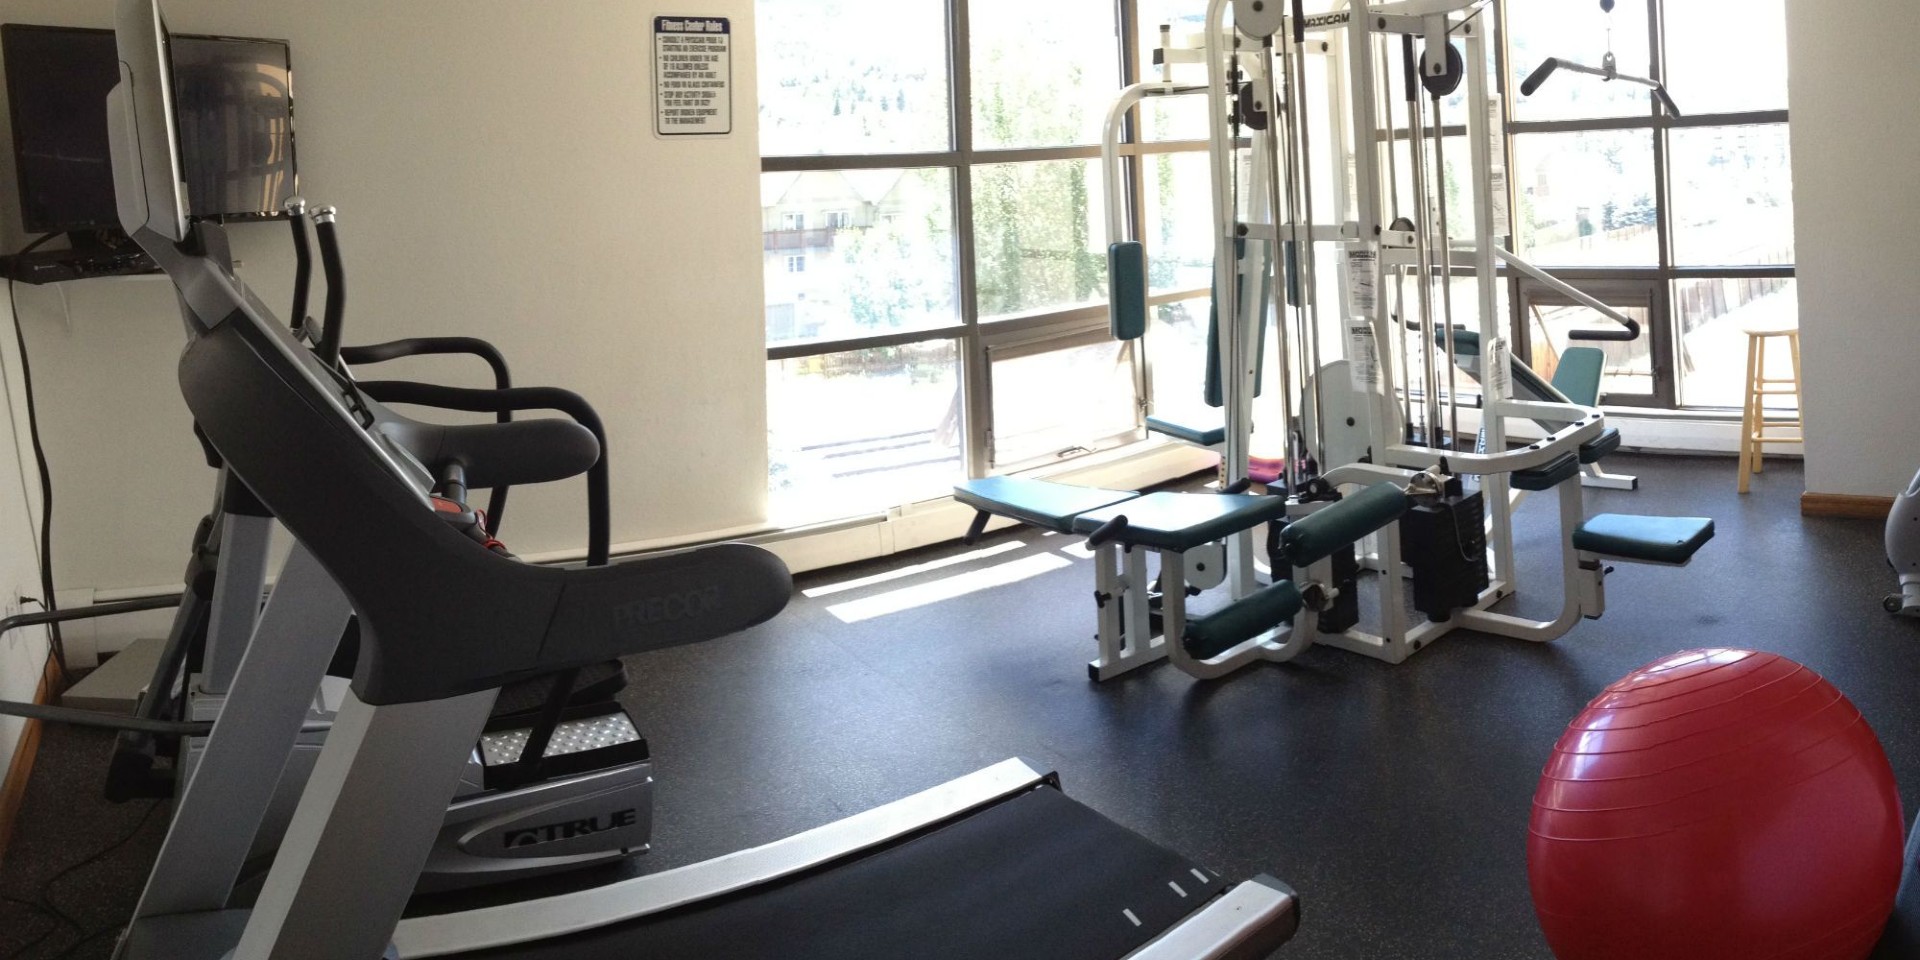 Chapel Square Workout Room